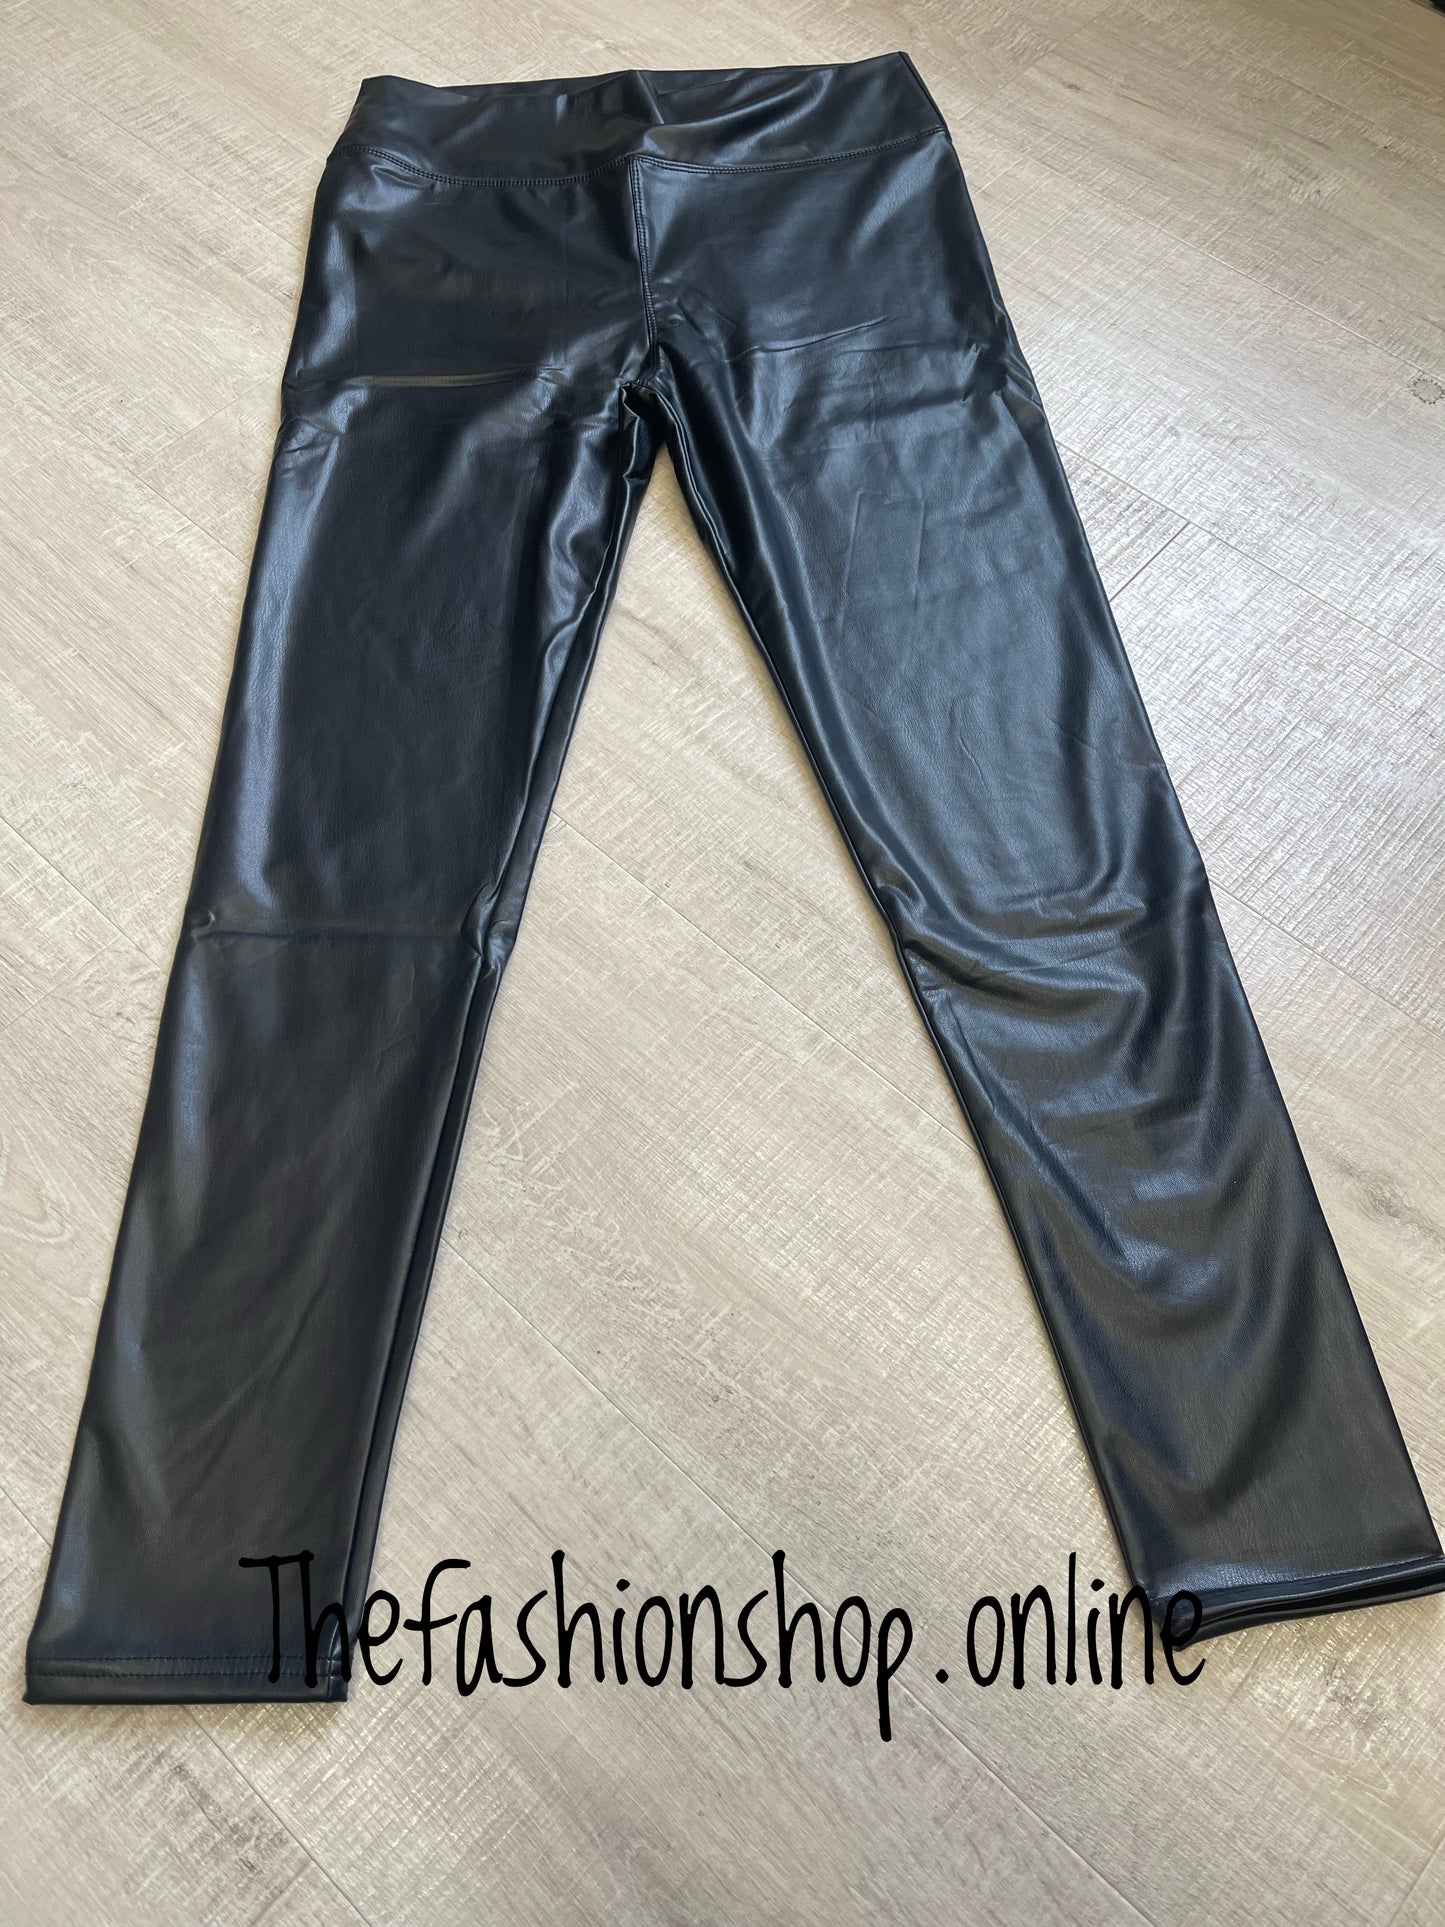 Black leather look jegging sizes 8-18